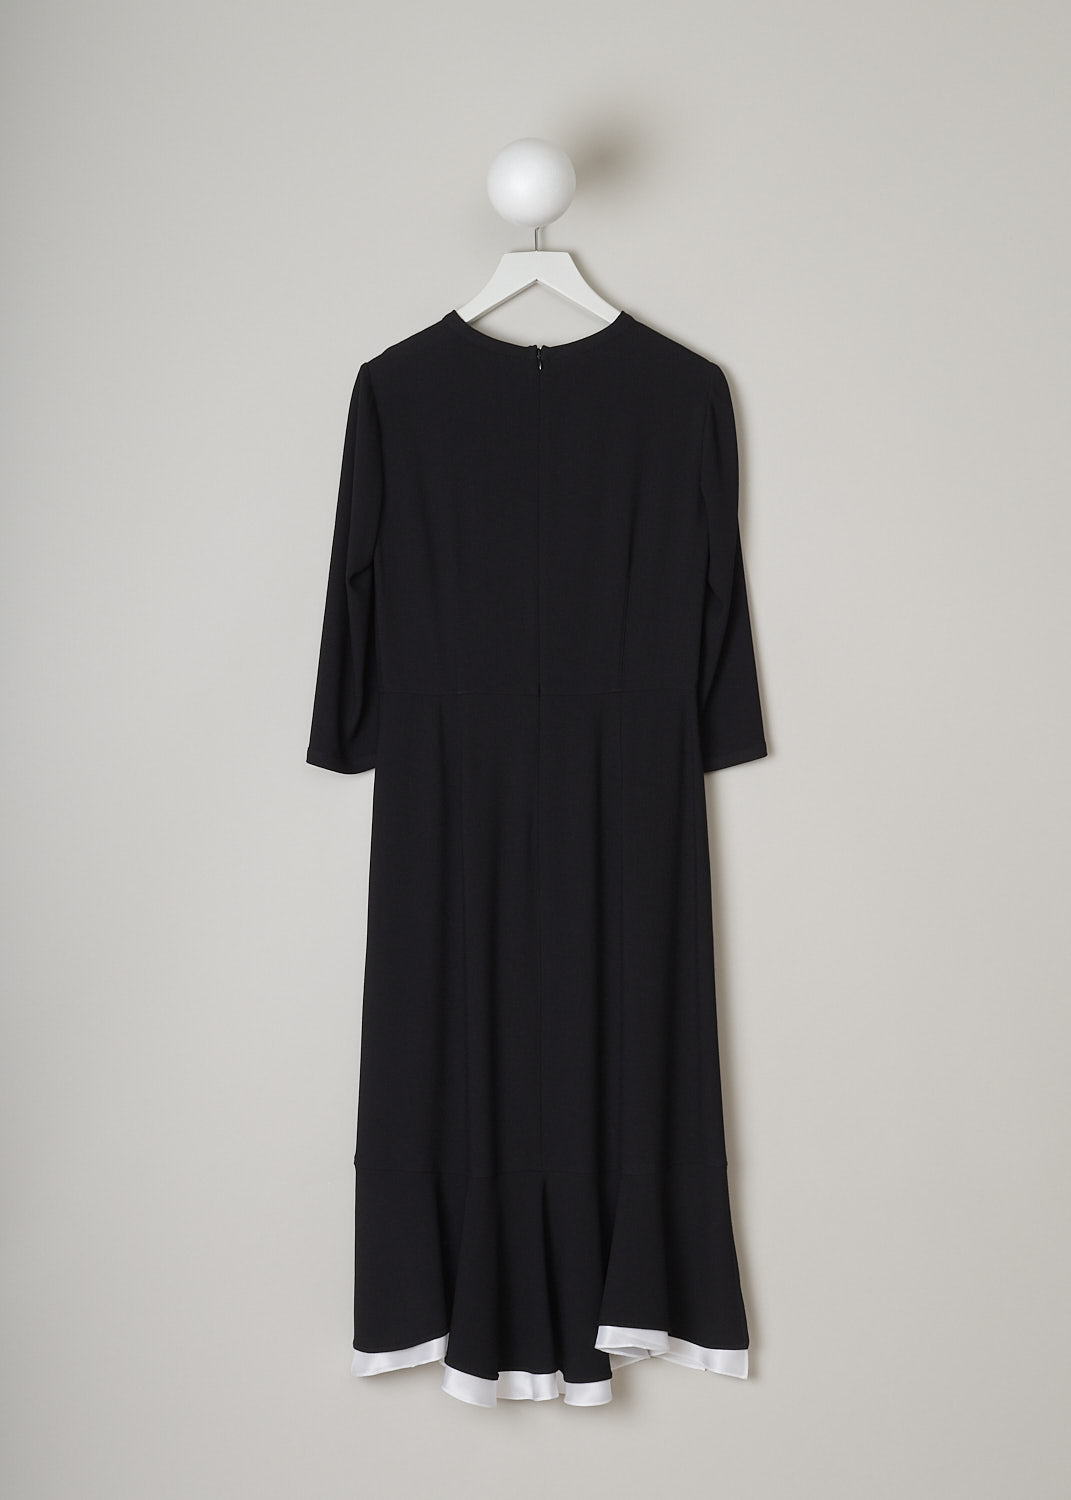 MARNI, BLACK MIDI DRESS WITH WHITE TRIM, ABMA0765Q0_UTV851_00N99, Black, White, Back, This black midi dress has a round neckline an three quarter sleeves. The dress has a fitted bodice with a slightly flared skirt. The hemline has a subtle flounce with a white satin trim peeking out.    
